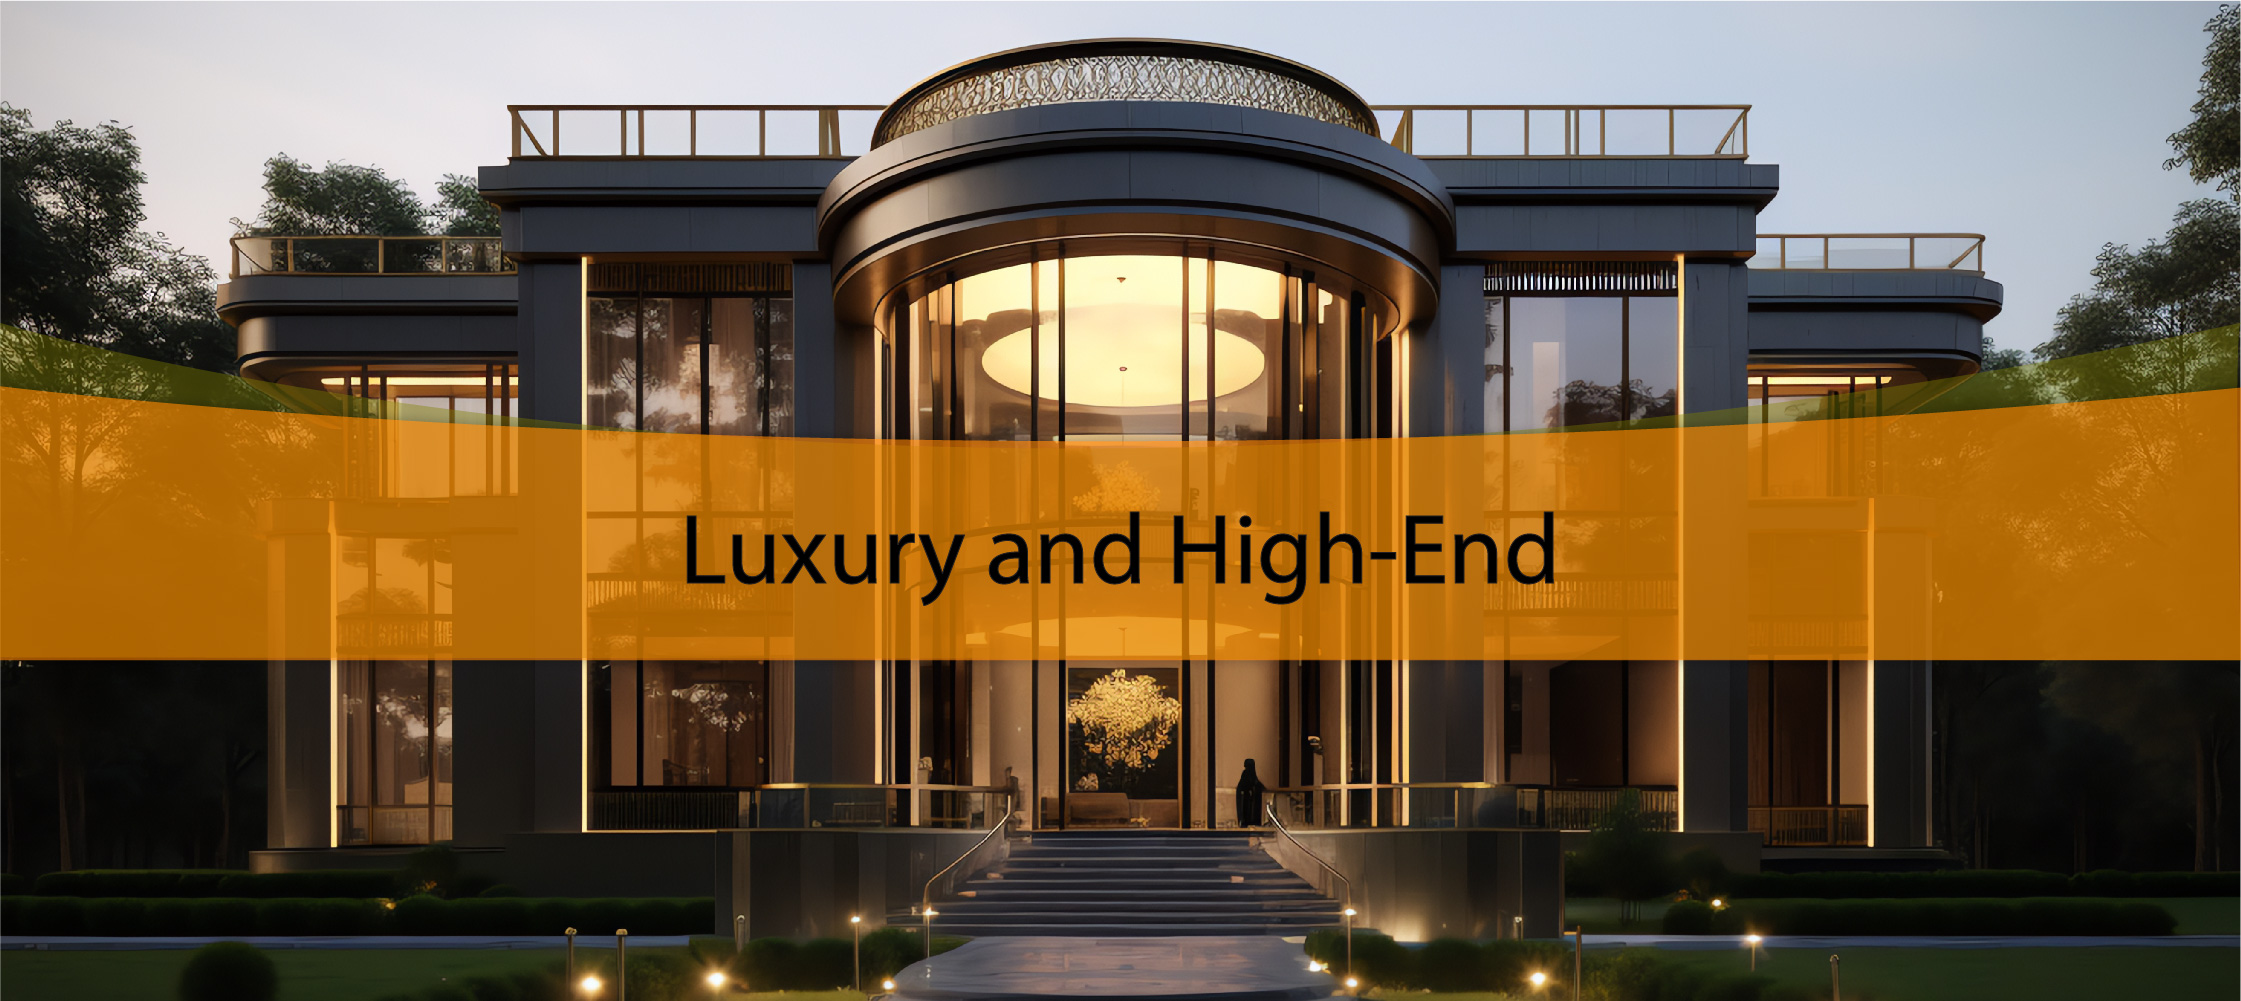 Luxury and High-End